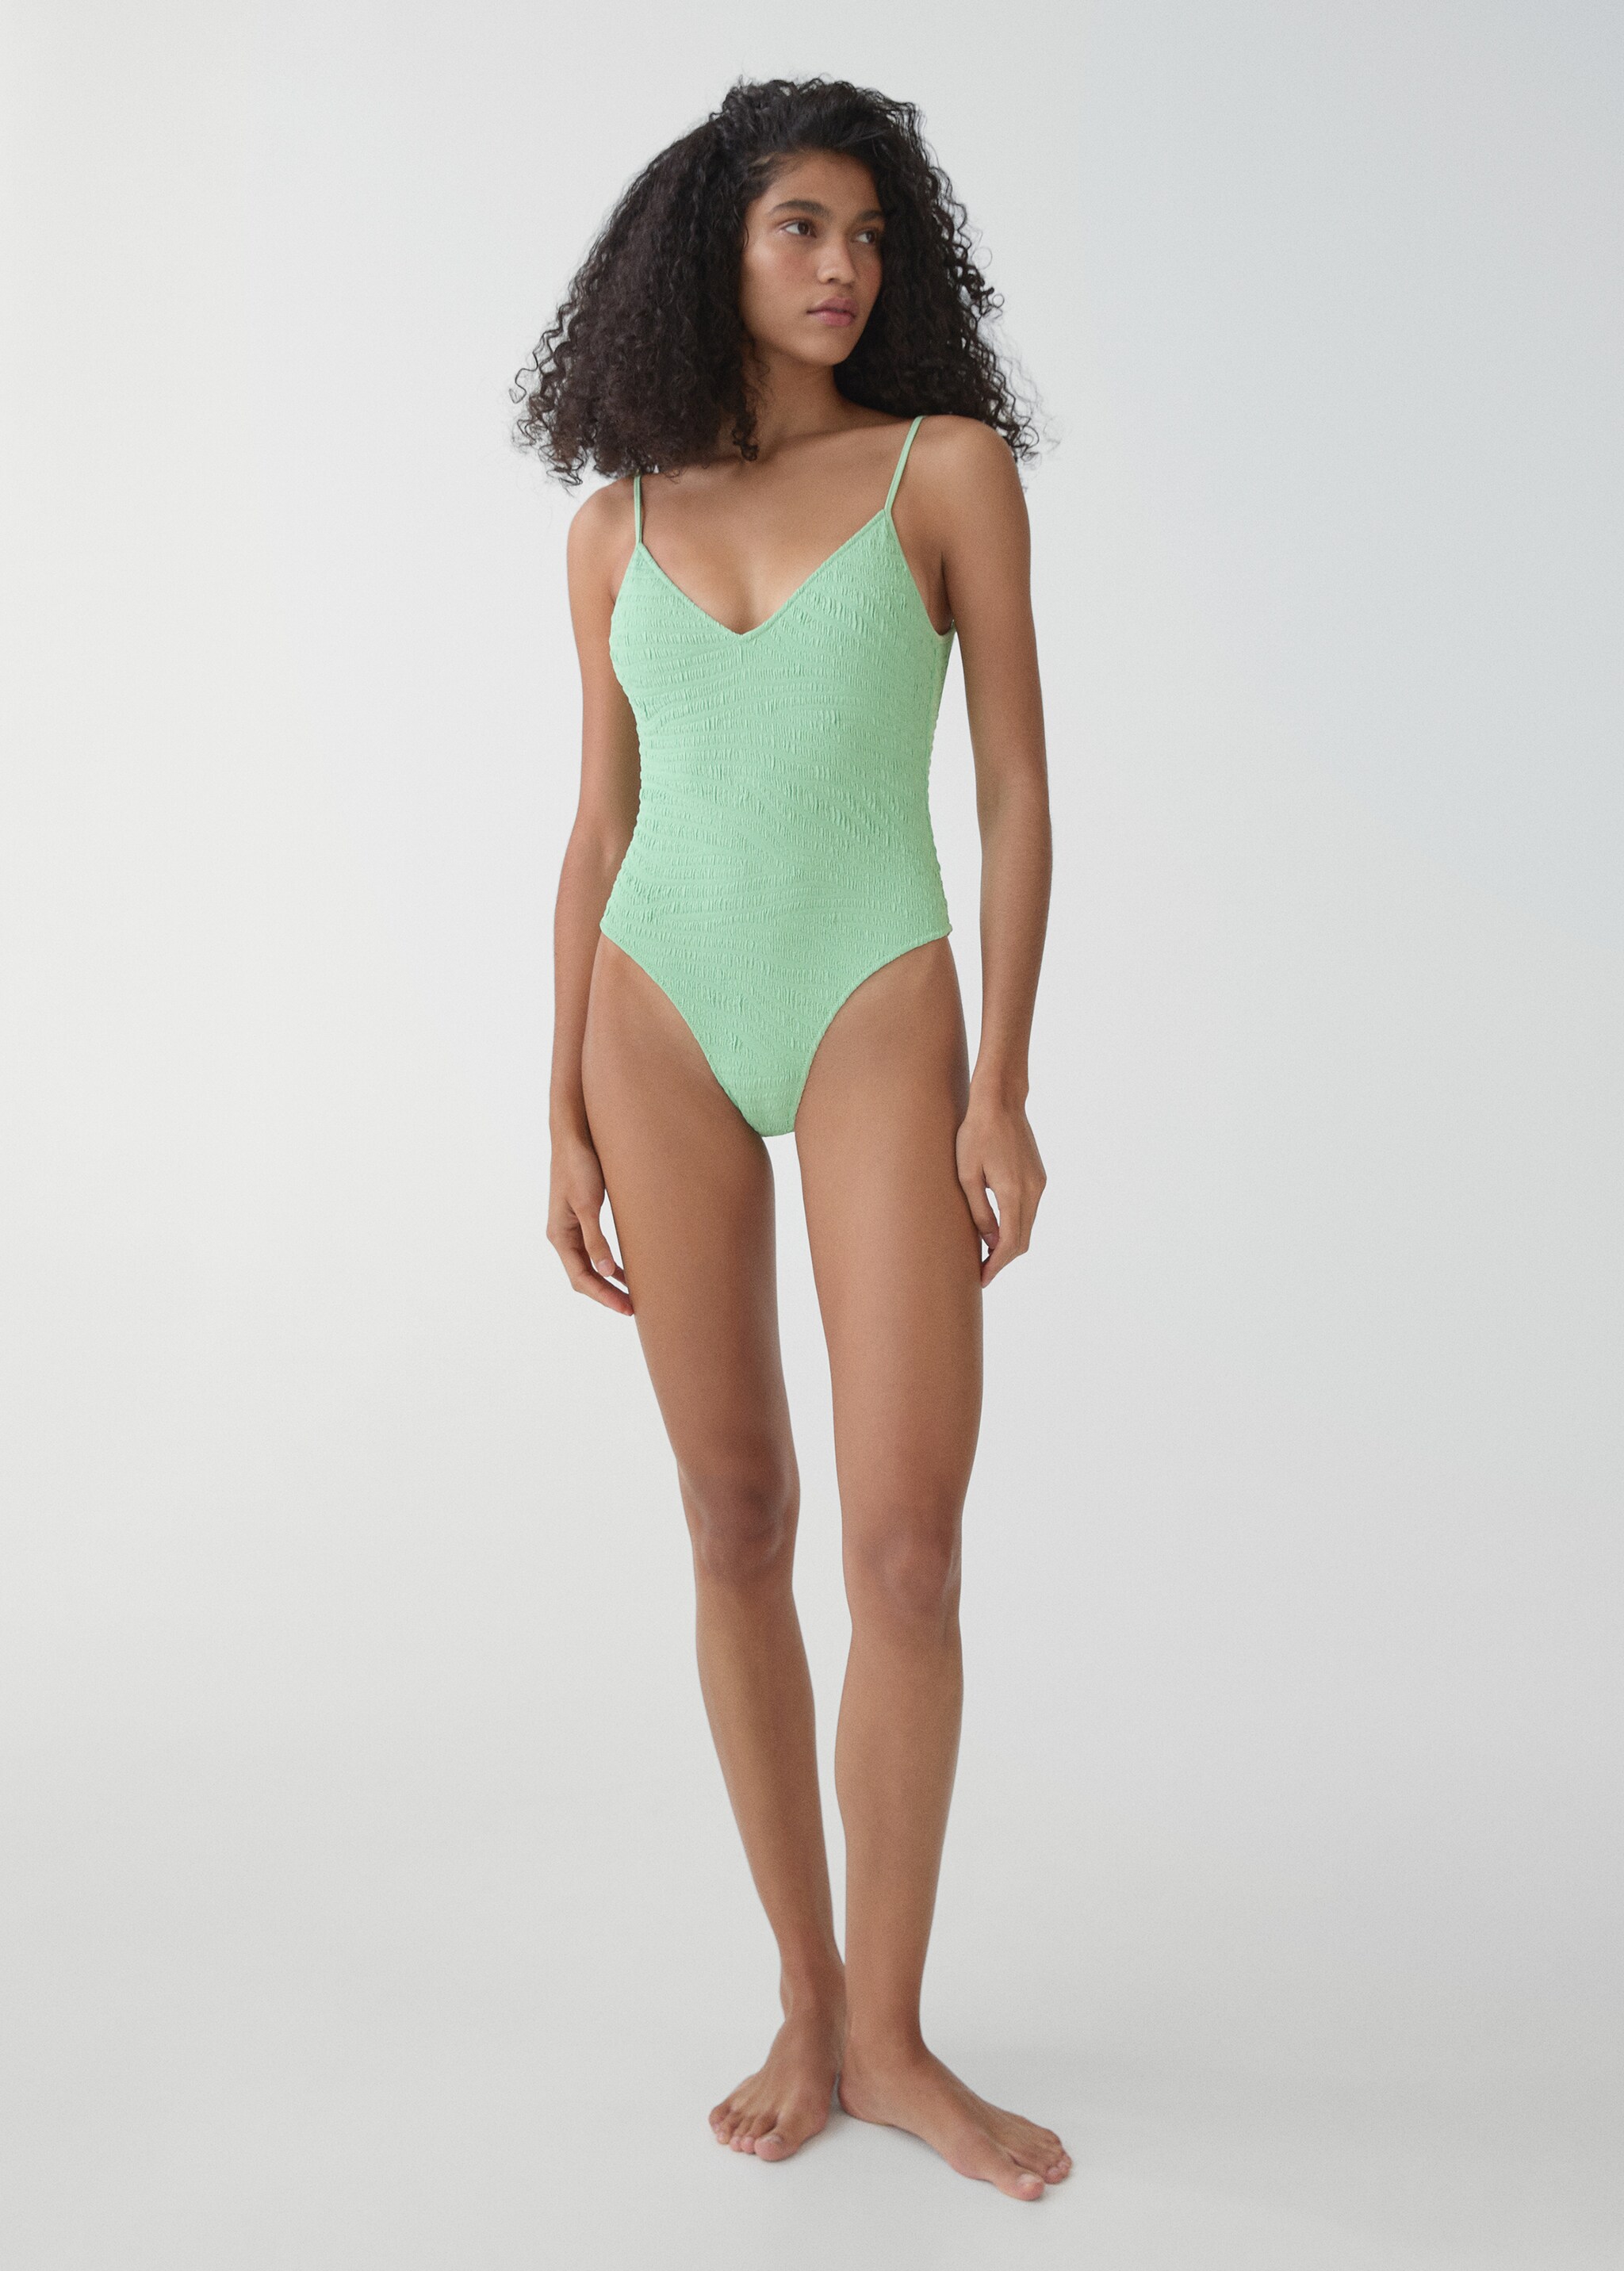 Textured swimsuit with adjustable straps - General plane